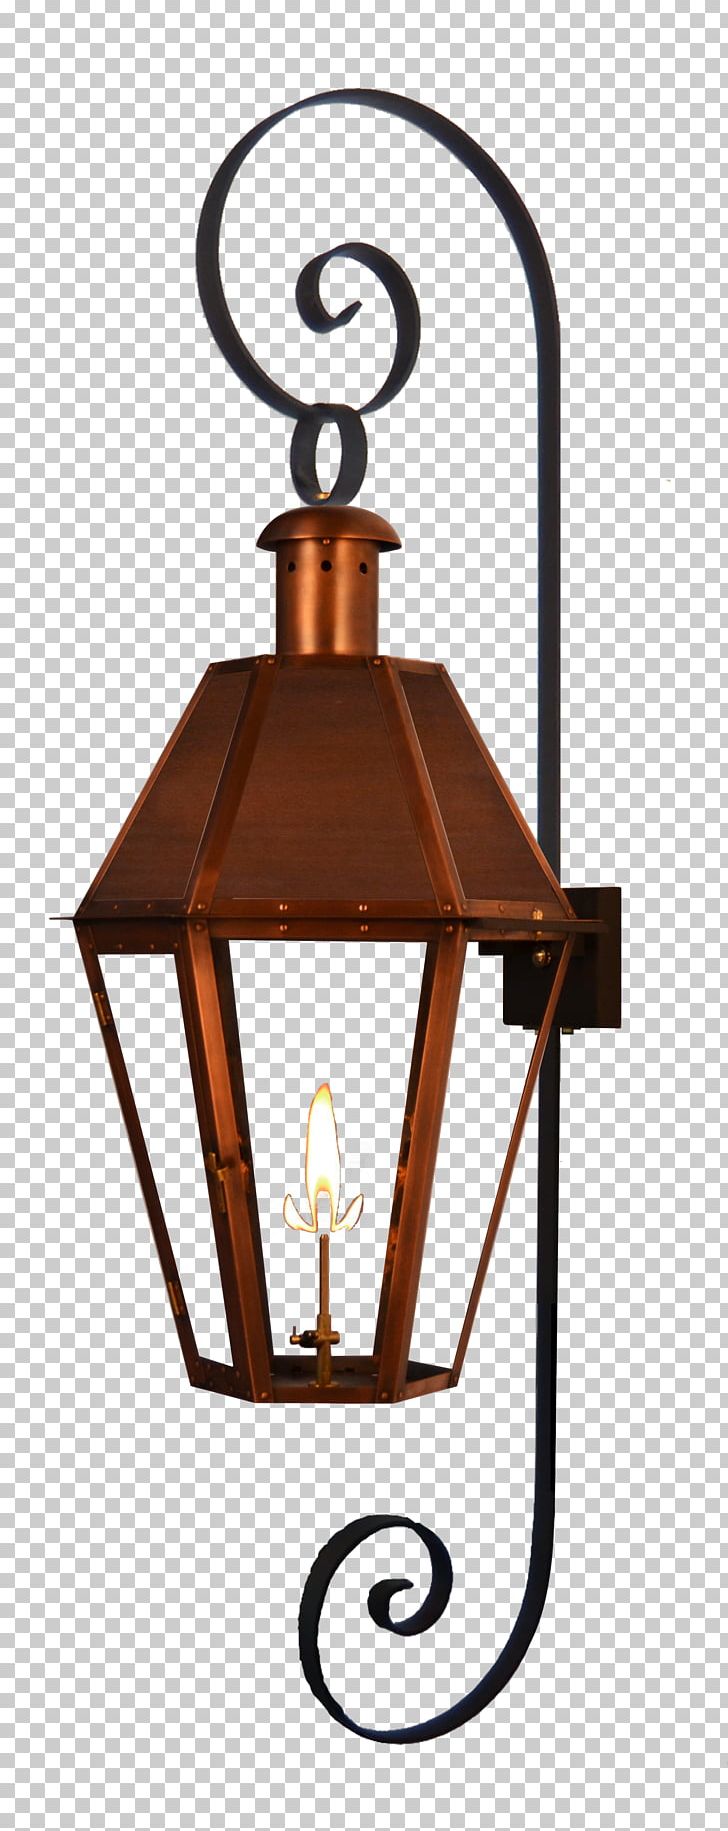 Lantern Gas Lighting Landscape Lighting Light Fixture PNG, Clipart, Candle Holder, Ceiling, Ceiling Fixture, Copper, Coppersmith Free PNG Download